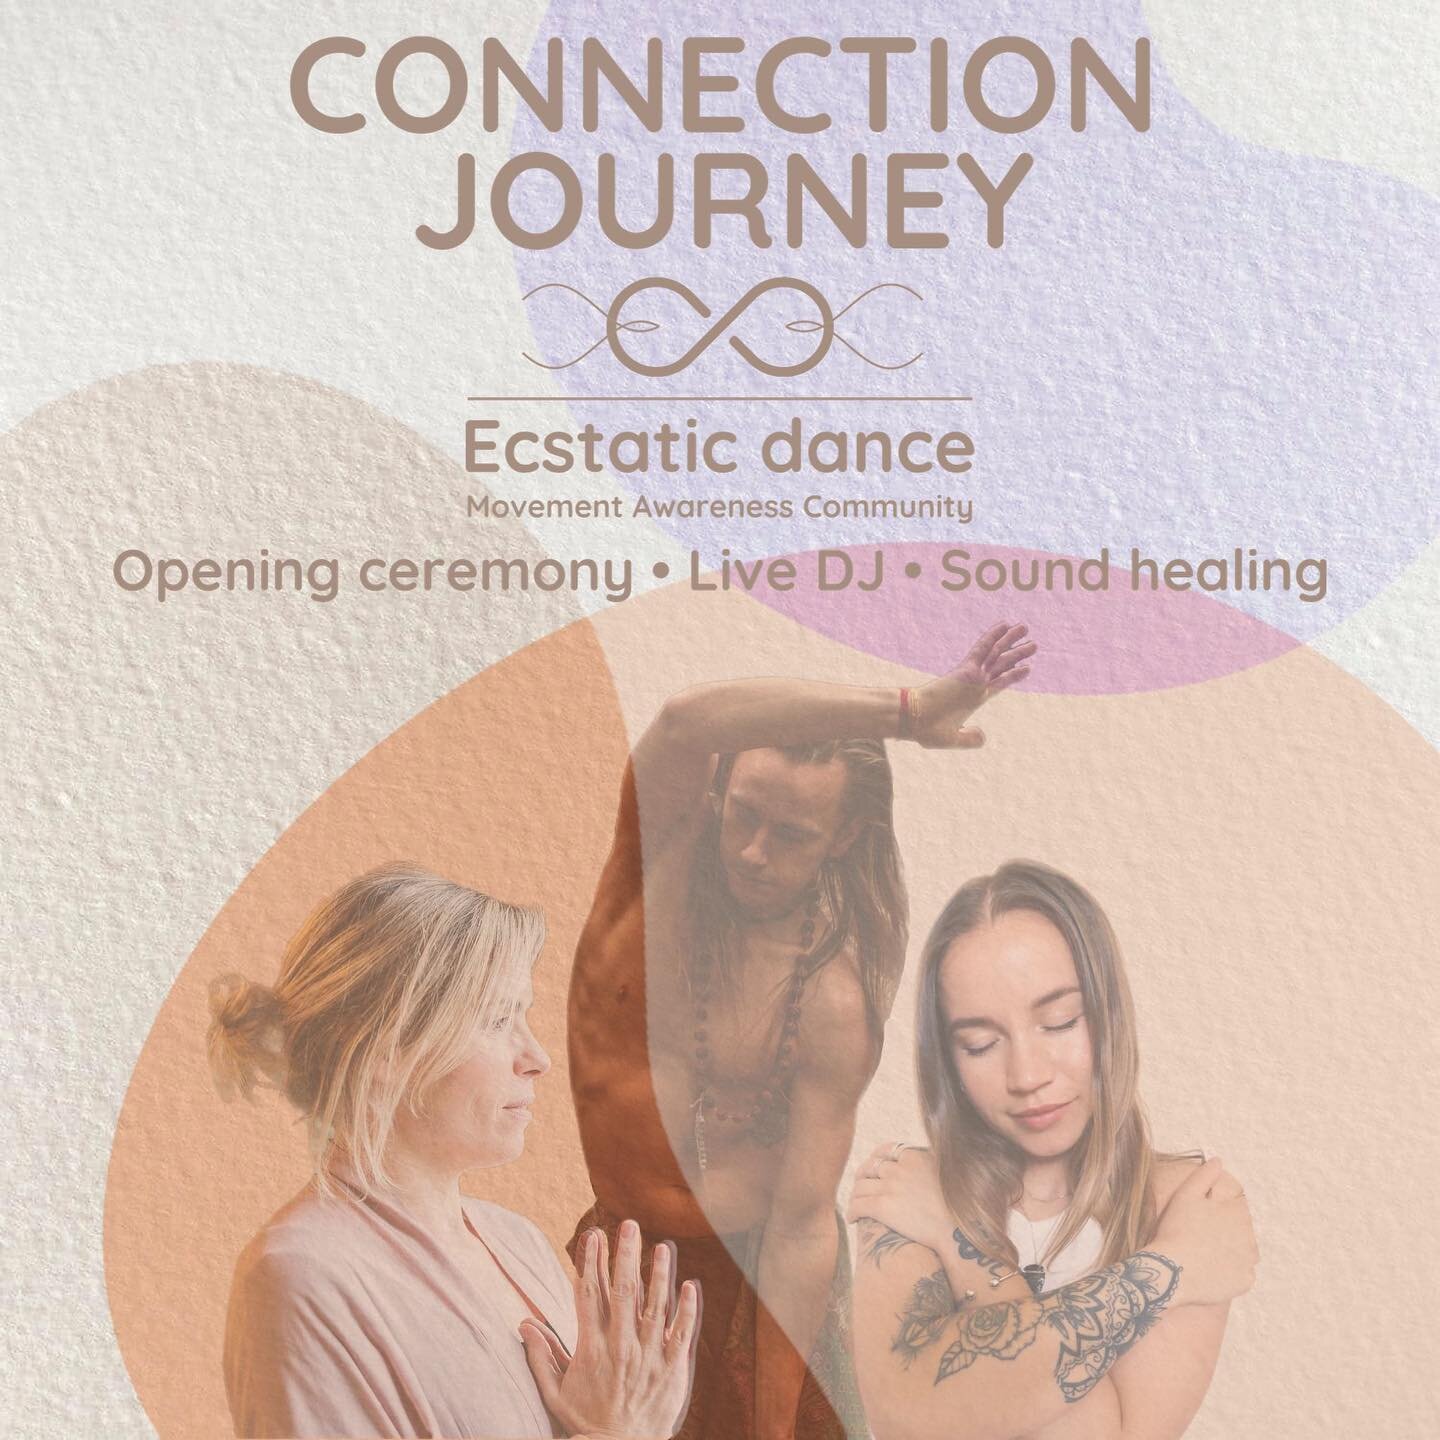 Hey everyone ⠀
⠀
We are back with a live DJ! ⠀
⠀
Conscious dance next Saturday🕺🏻👯&zwj;♀️💃 ⠀
Movement as meditation 🧘🏽 🕉☯️⚛️ ⠀
Yogastef on the decks 🎧❤️&zwj;🔥🎶 ⠀
Save the date 22/10/22 ⠀
⠀
What to expect:⠀
⠀
⚡️Ceremony including an optional 